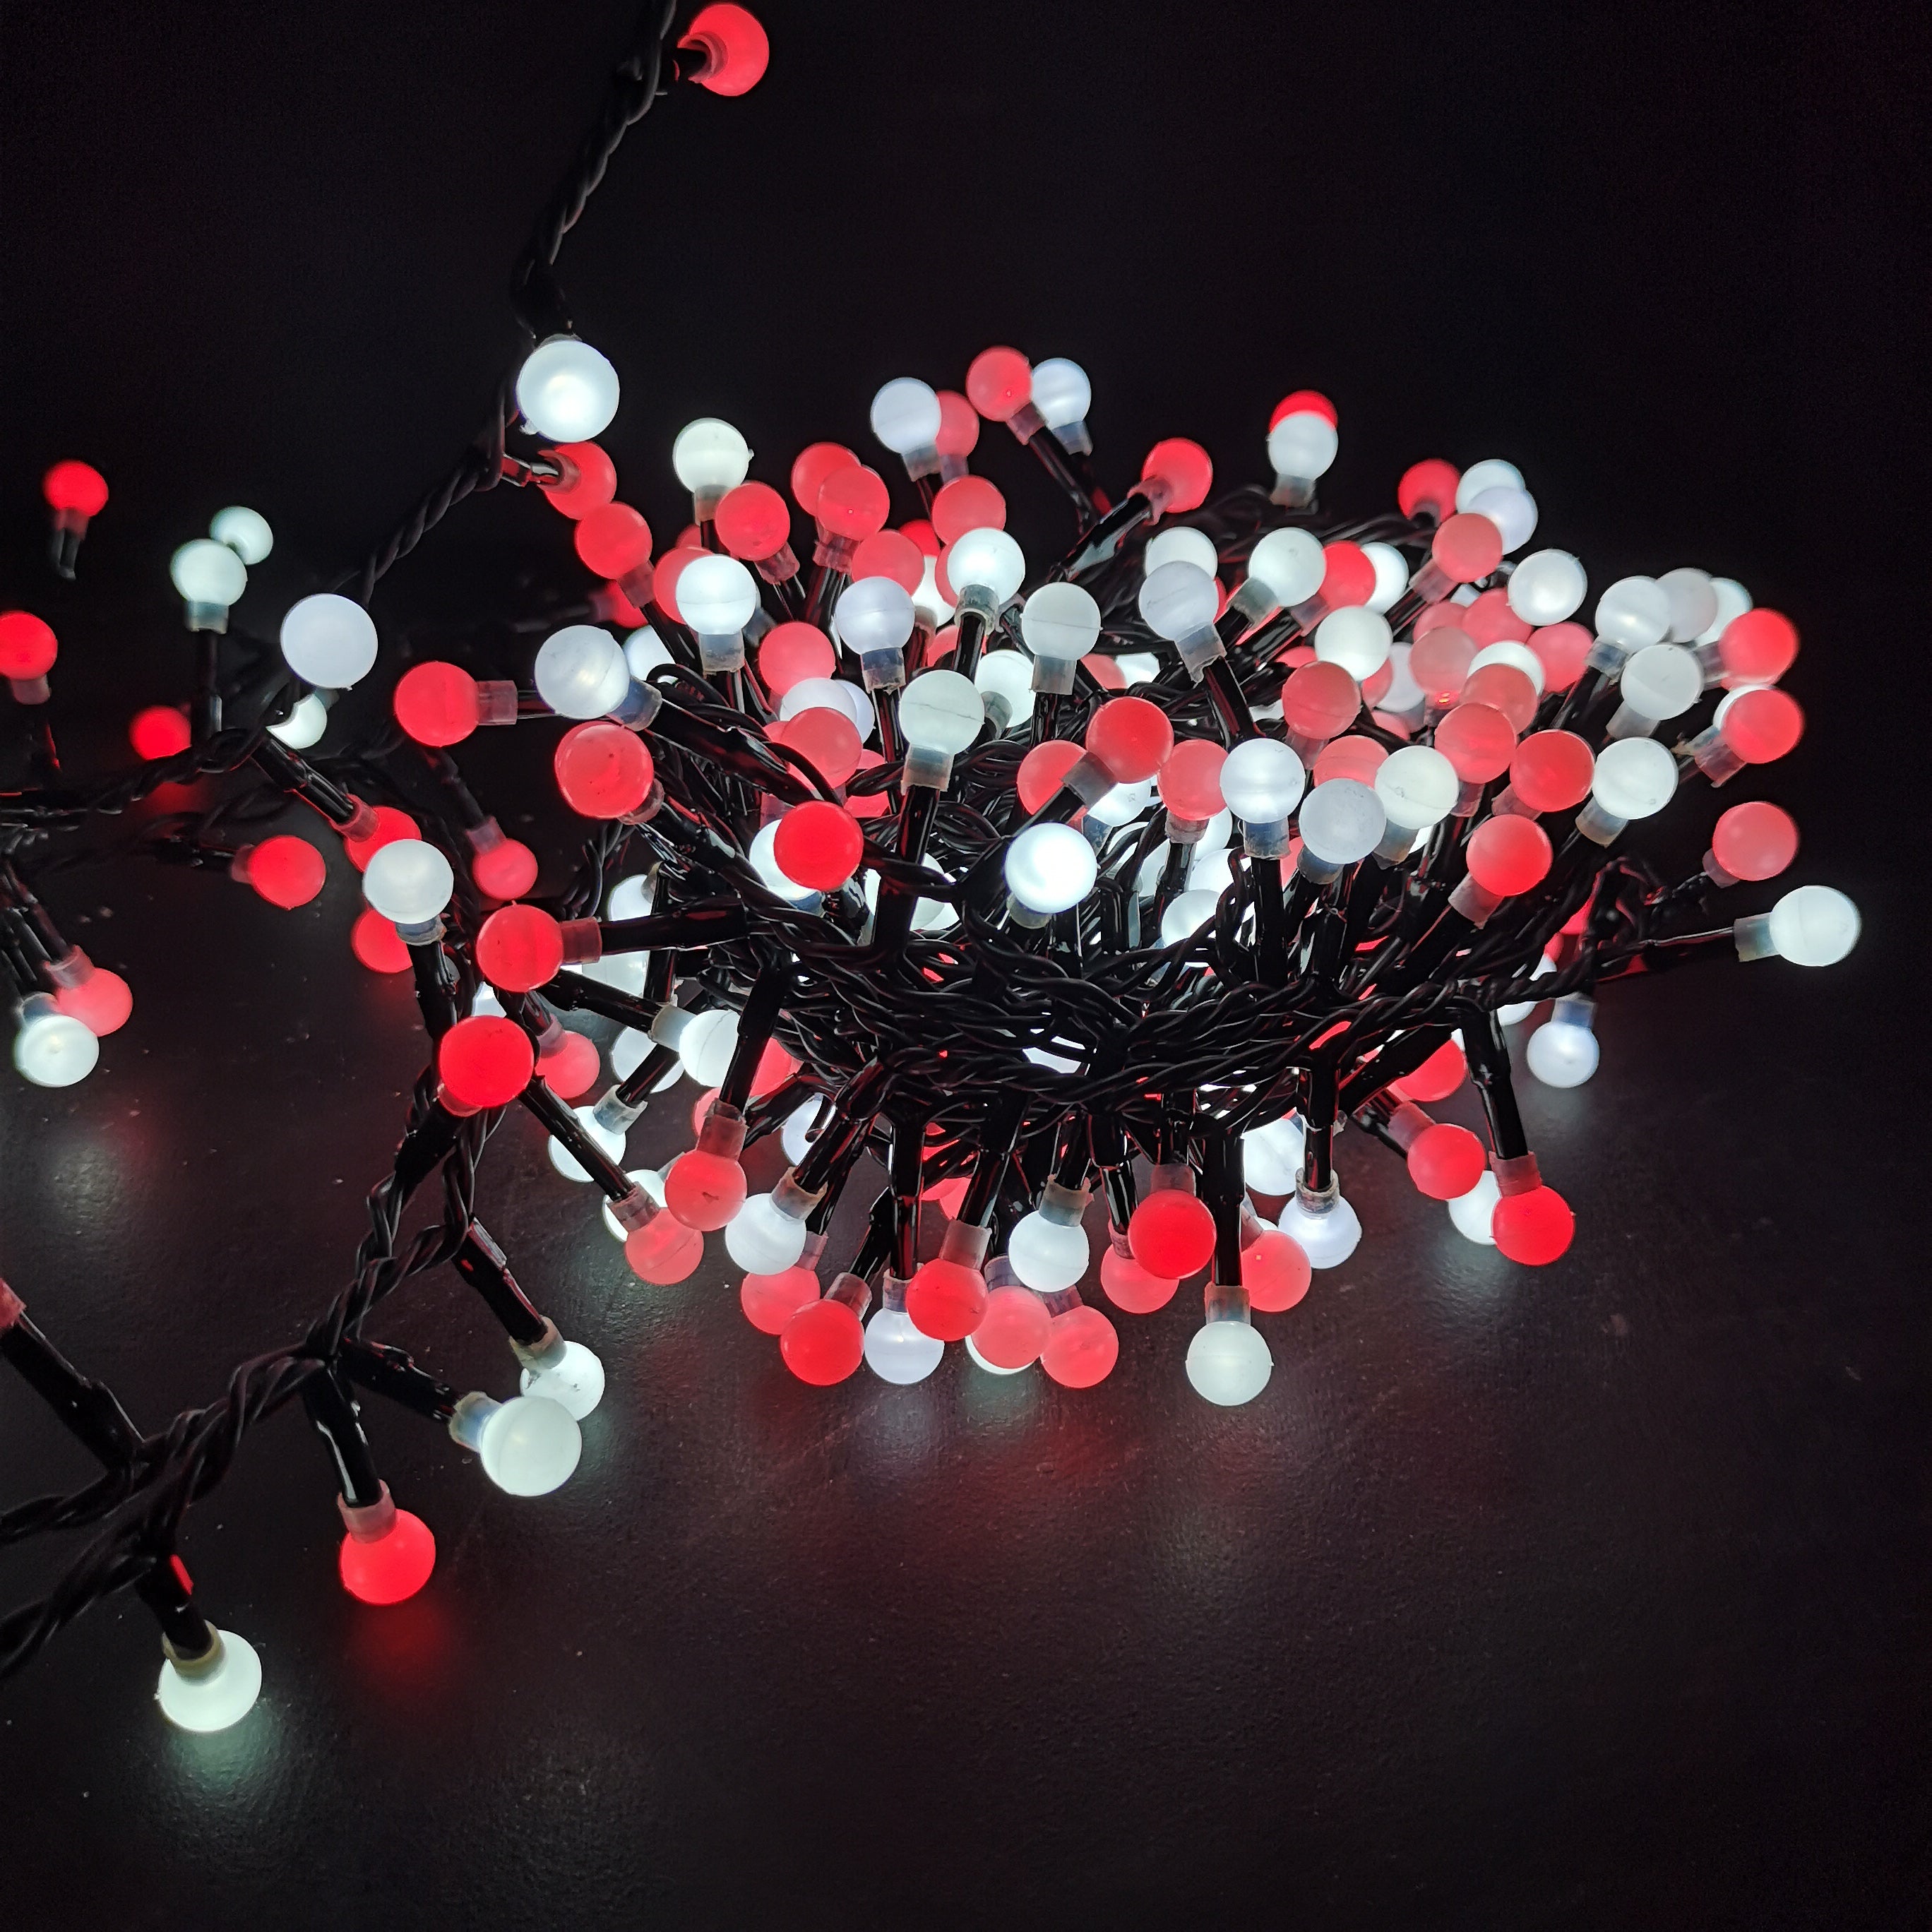 400 LED 10m Festive Indoor Outdoor Christmas Multi Function Mains Operated String Lights in Red & White